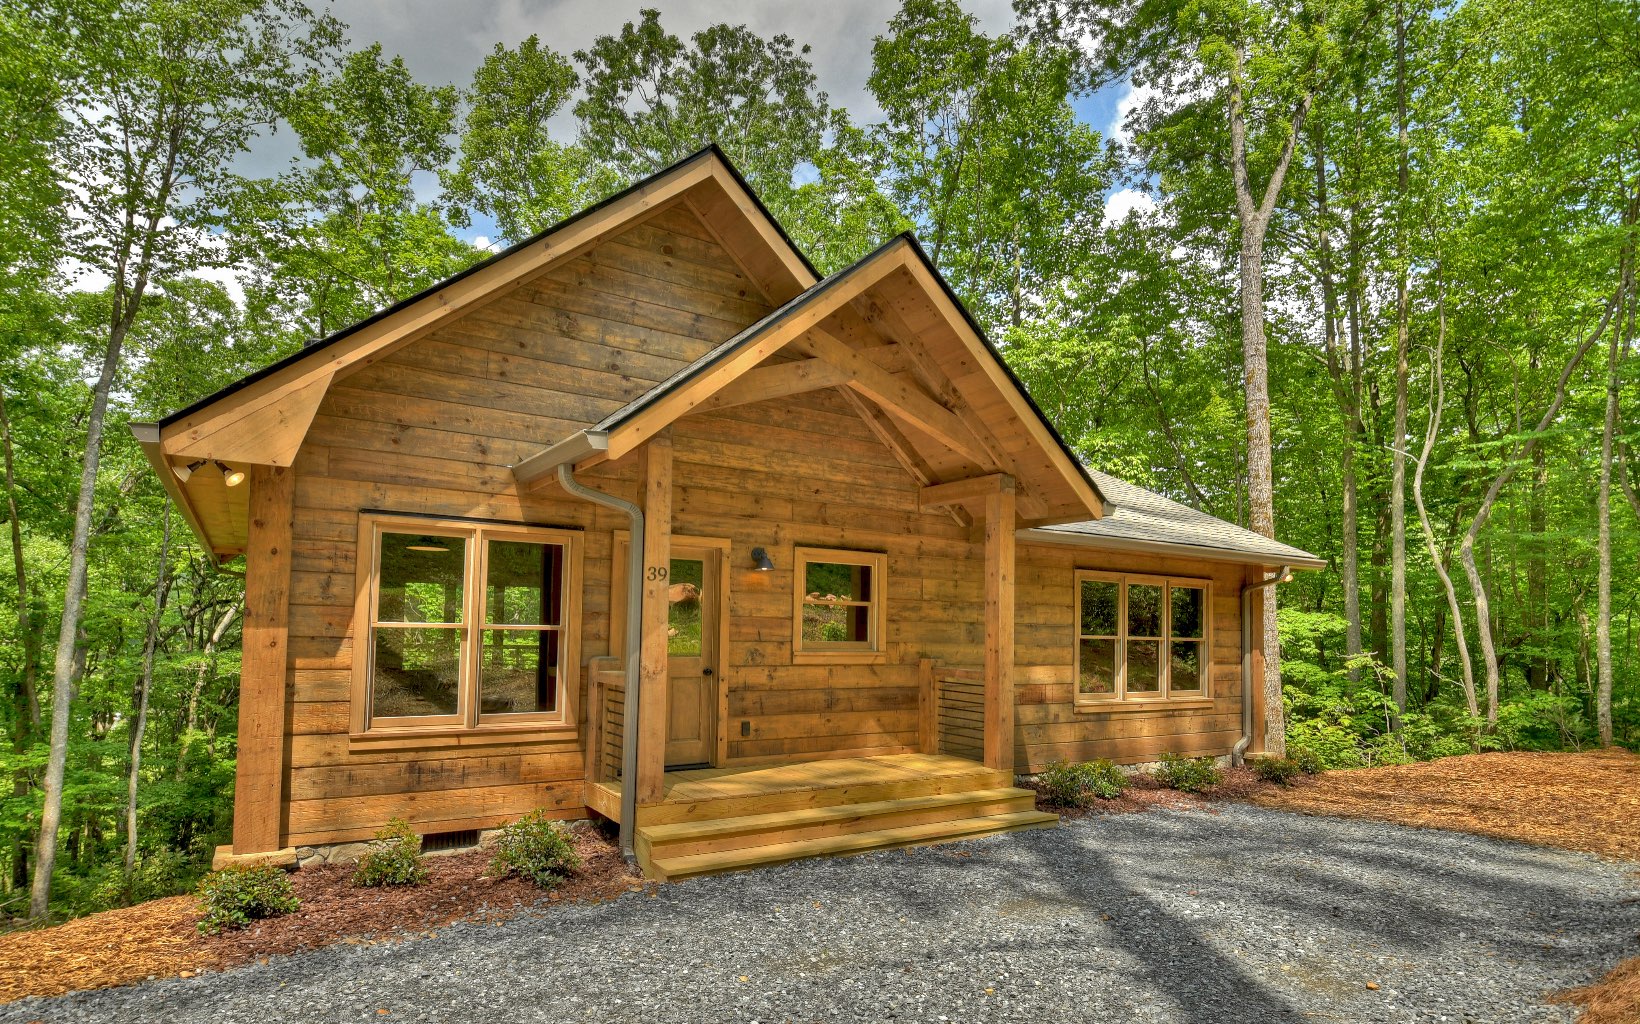 Mountain bikers dream. New real log cabin sitting on pristine creek features two bedrooms and two full baths. Open kitchen and greenroom with covered porch, wood floors throughout.